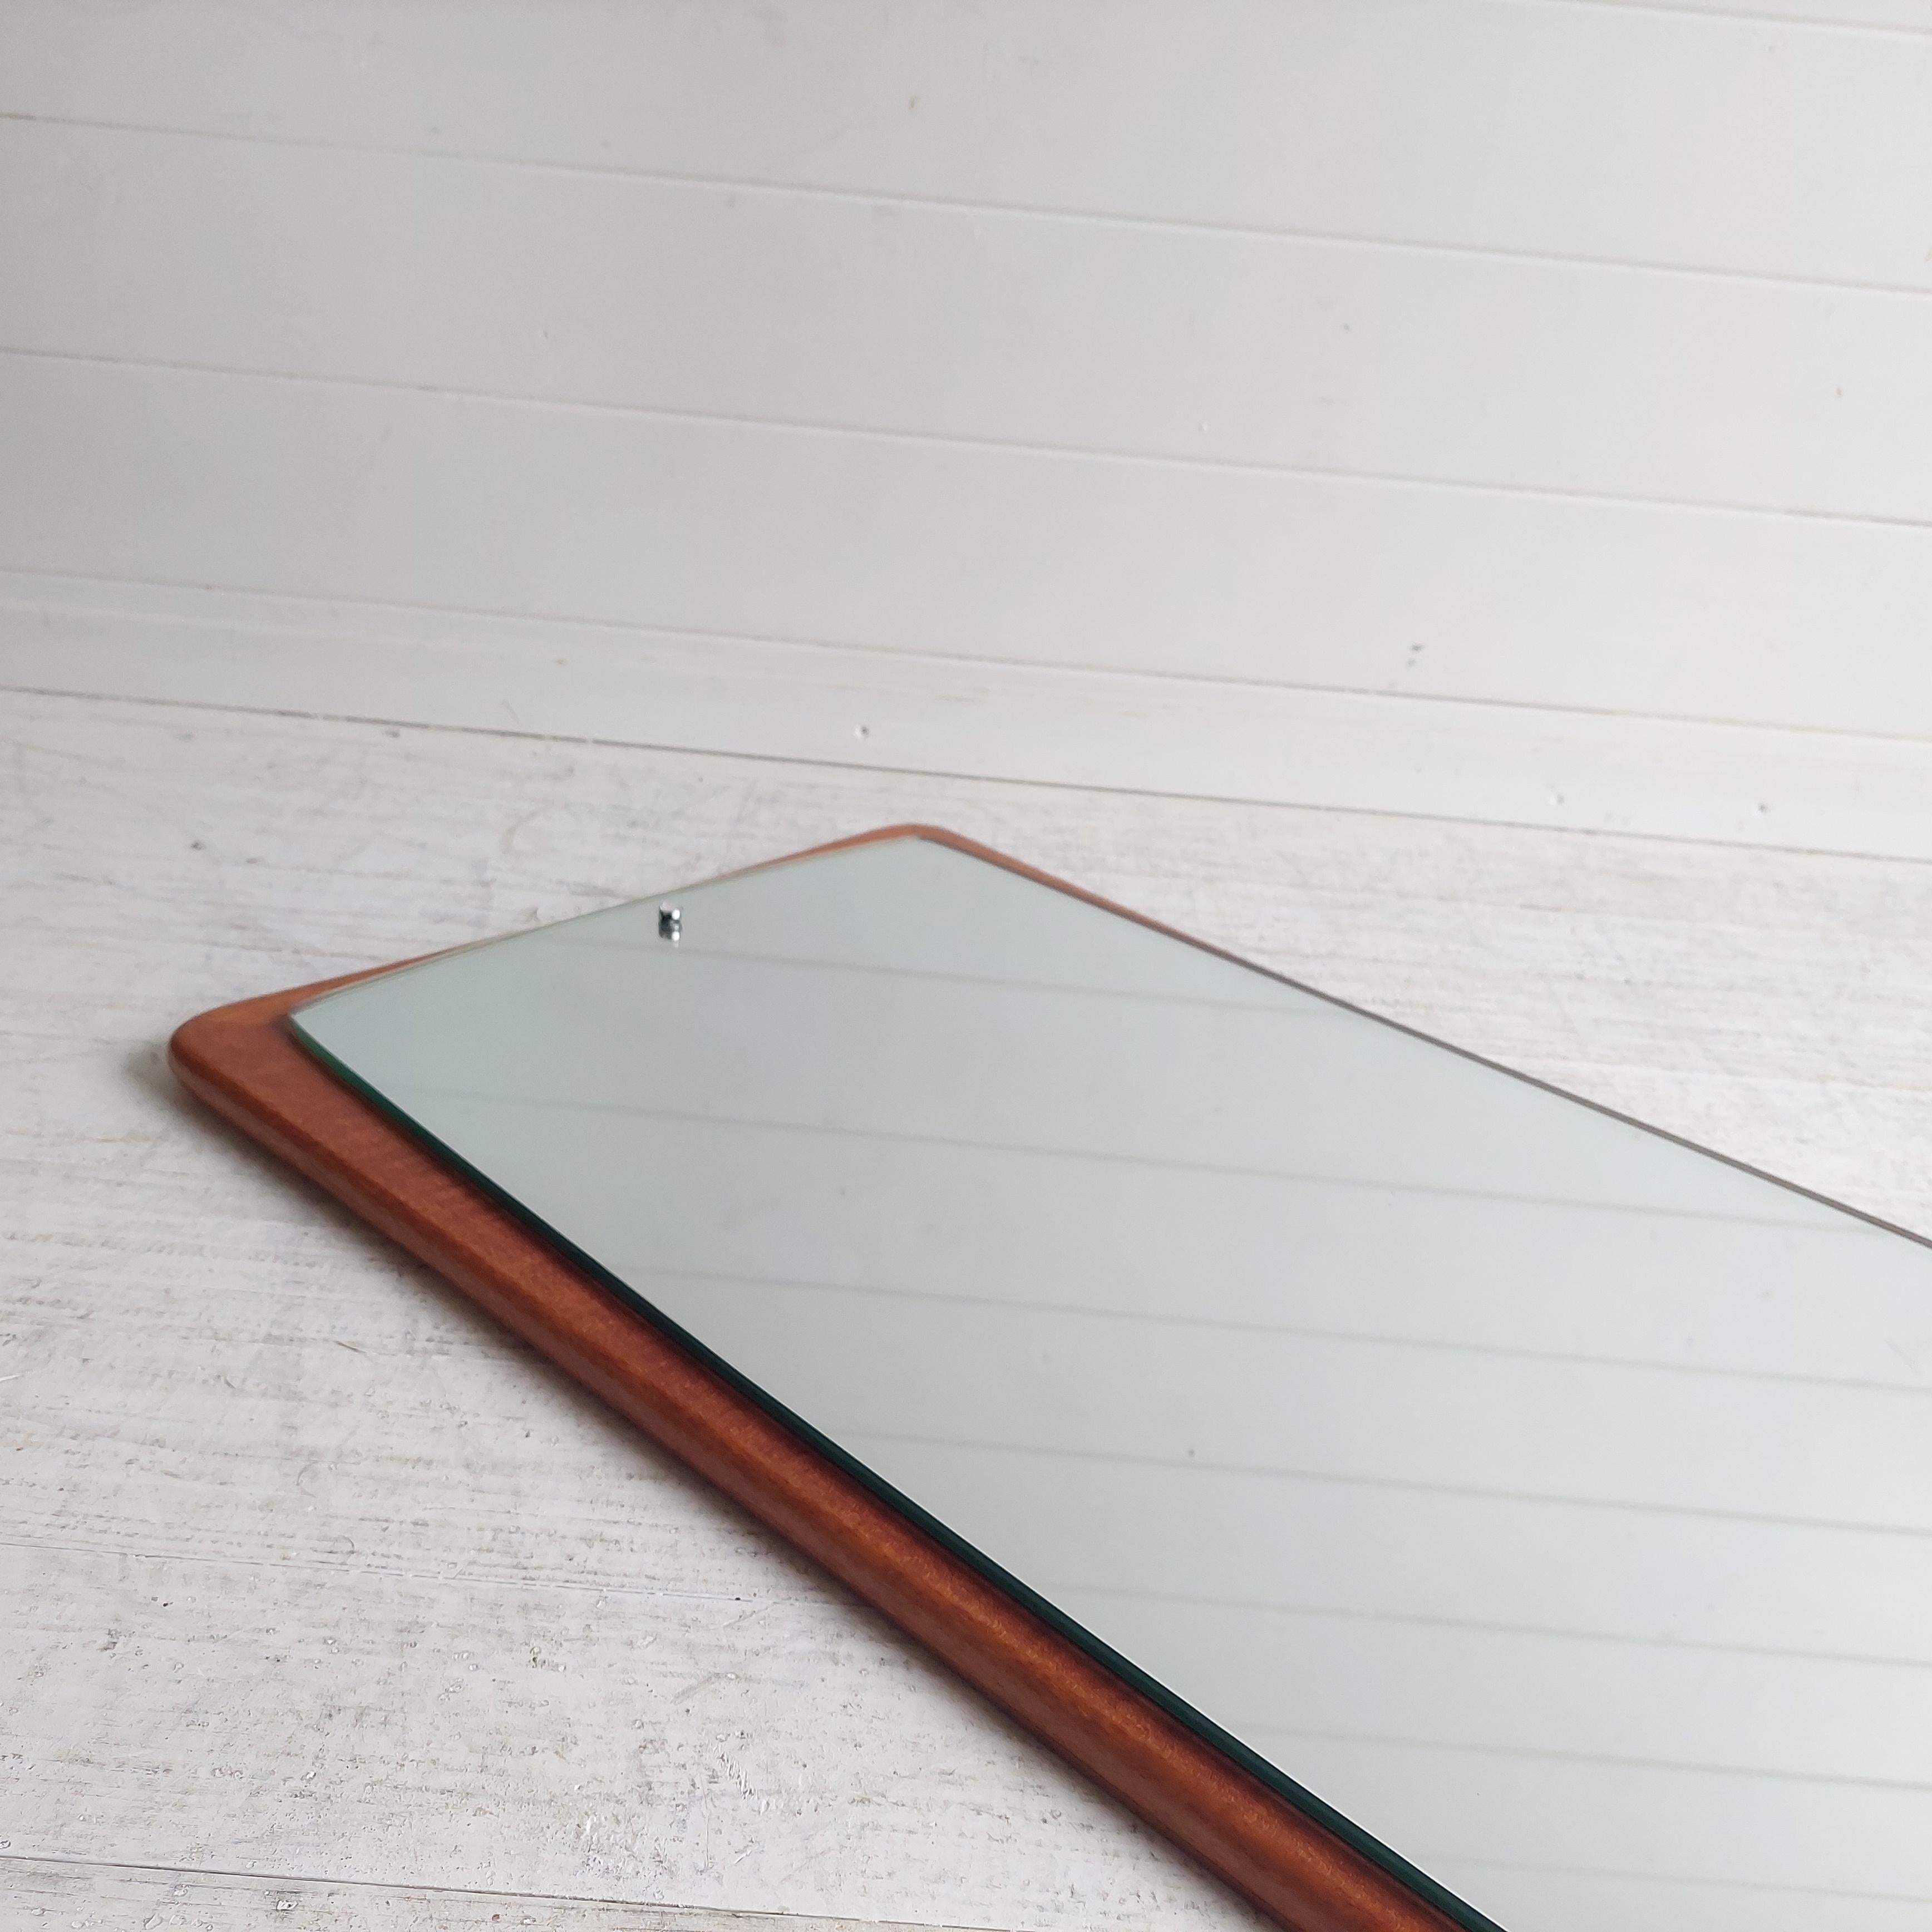 60/70's X Large Mid Century Modern Teak Framed Wall Mirror - Portrait - Danish Scandi Style Vintage - 
A generously sized and utterly fabulous 60/70's rectangular retro wall mirror, oozing with Scandi boho minimalist style mounted on a curved teak